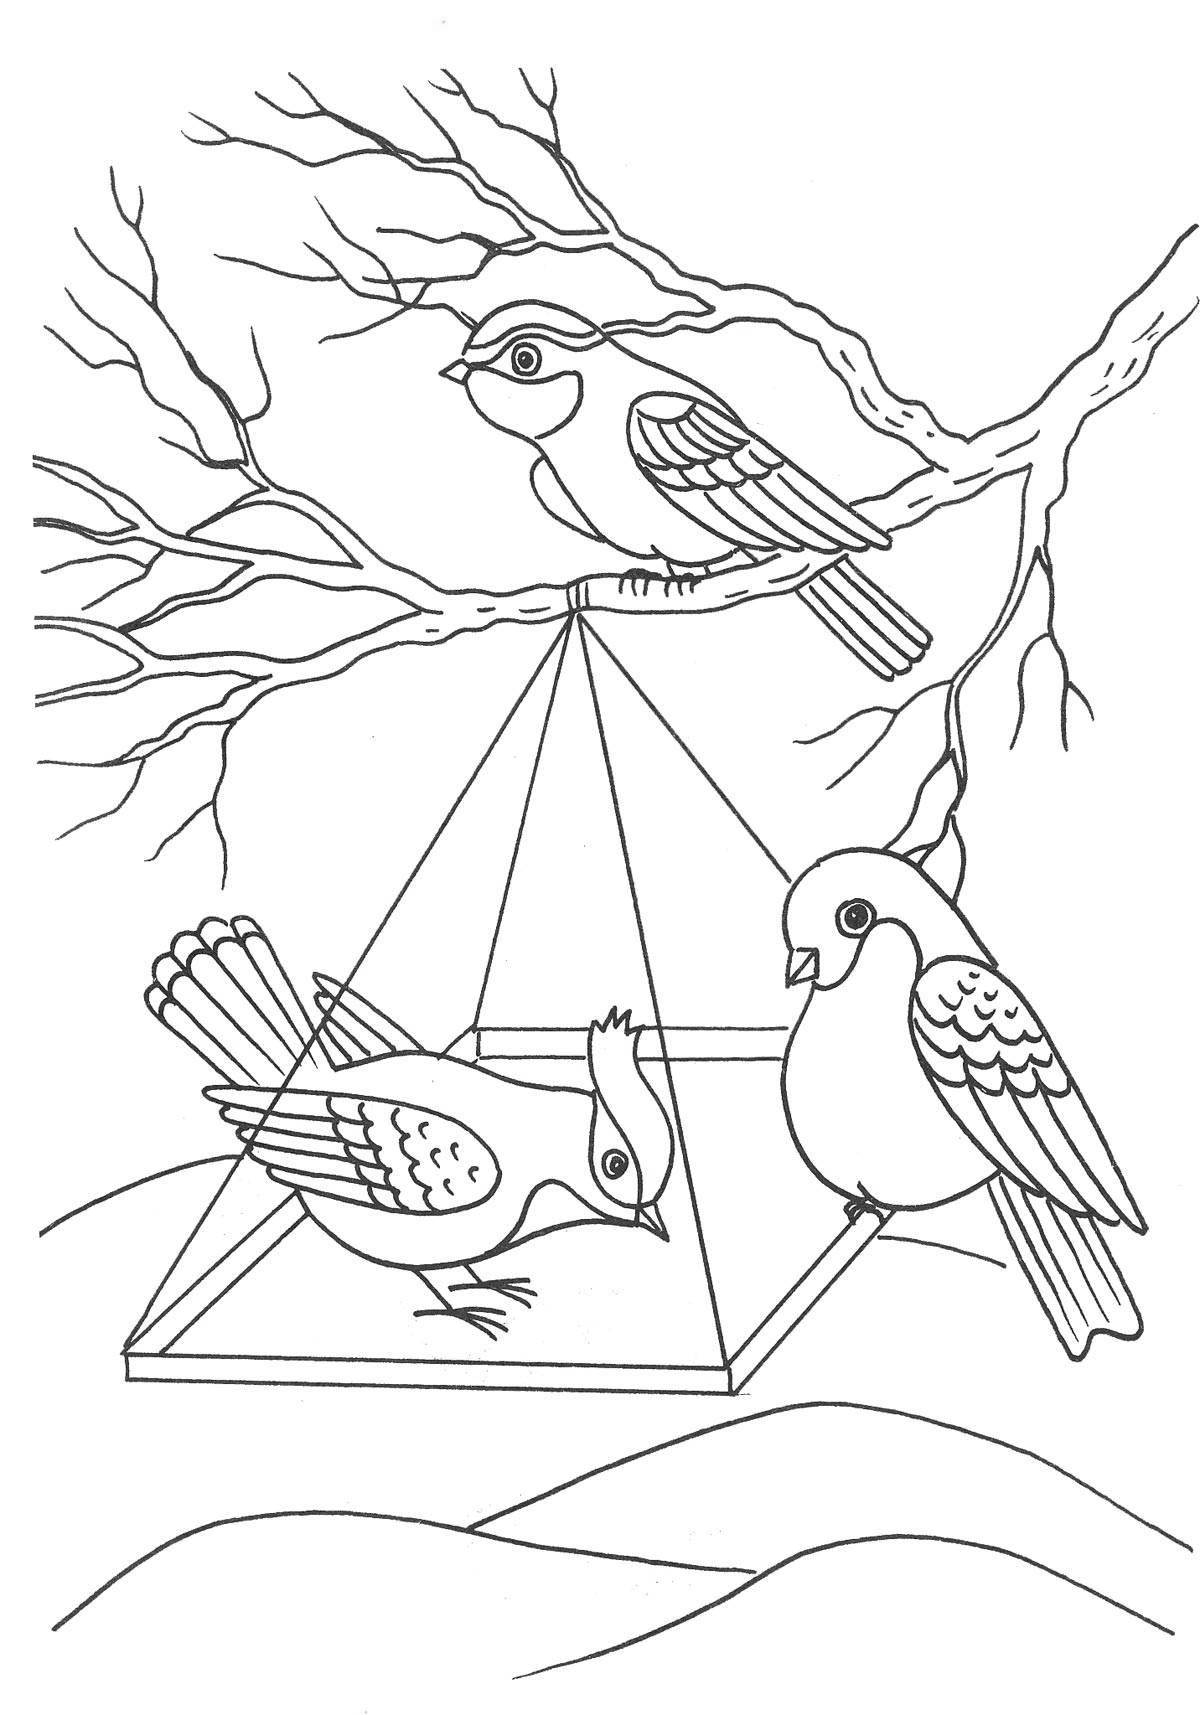 Fun bird feeder coloring book for 4-5 year olds